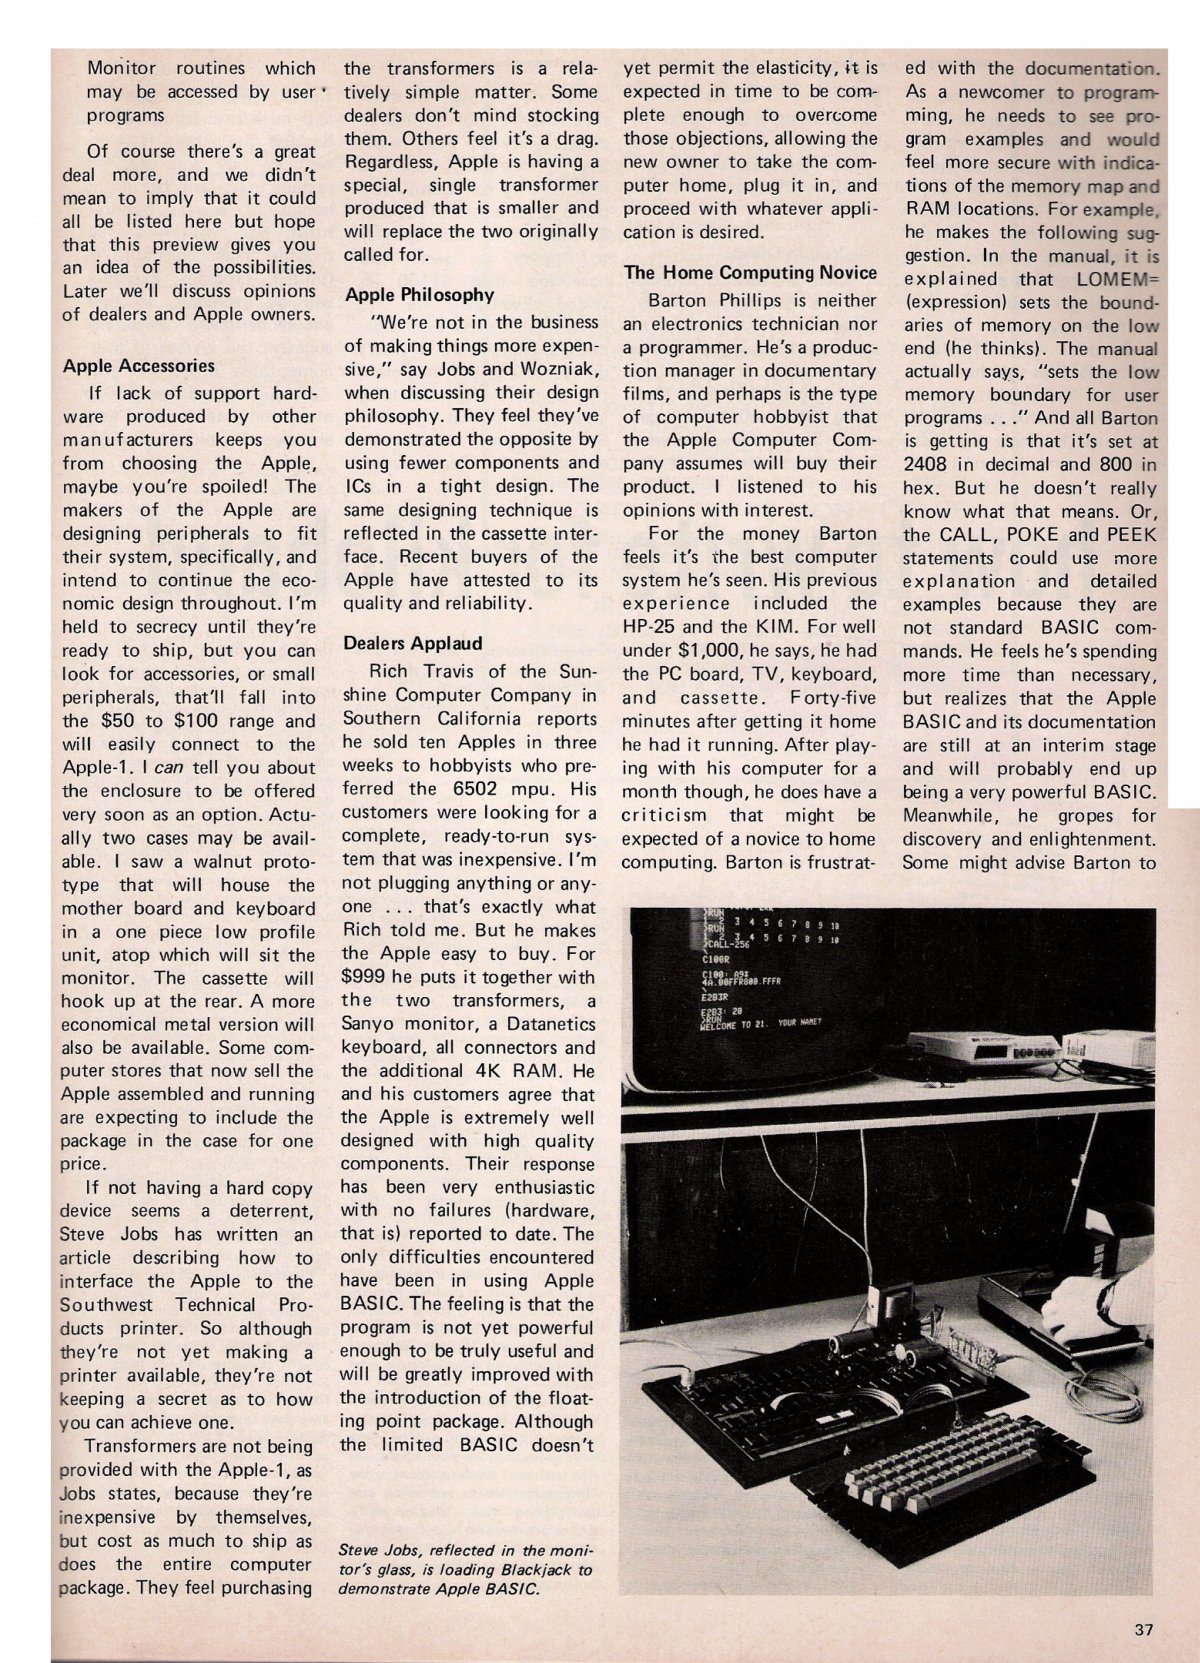 This is the First News Article Ever Written About Apple [Images]